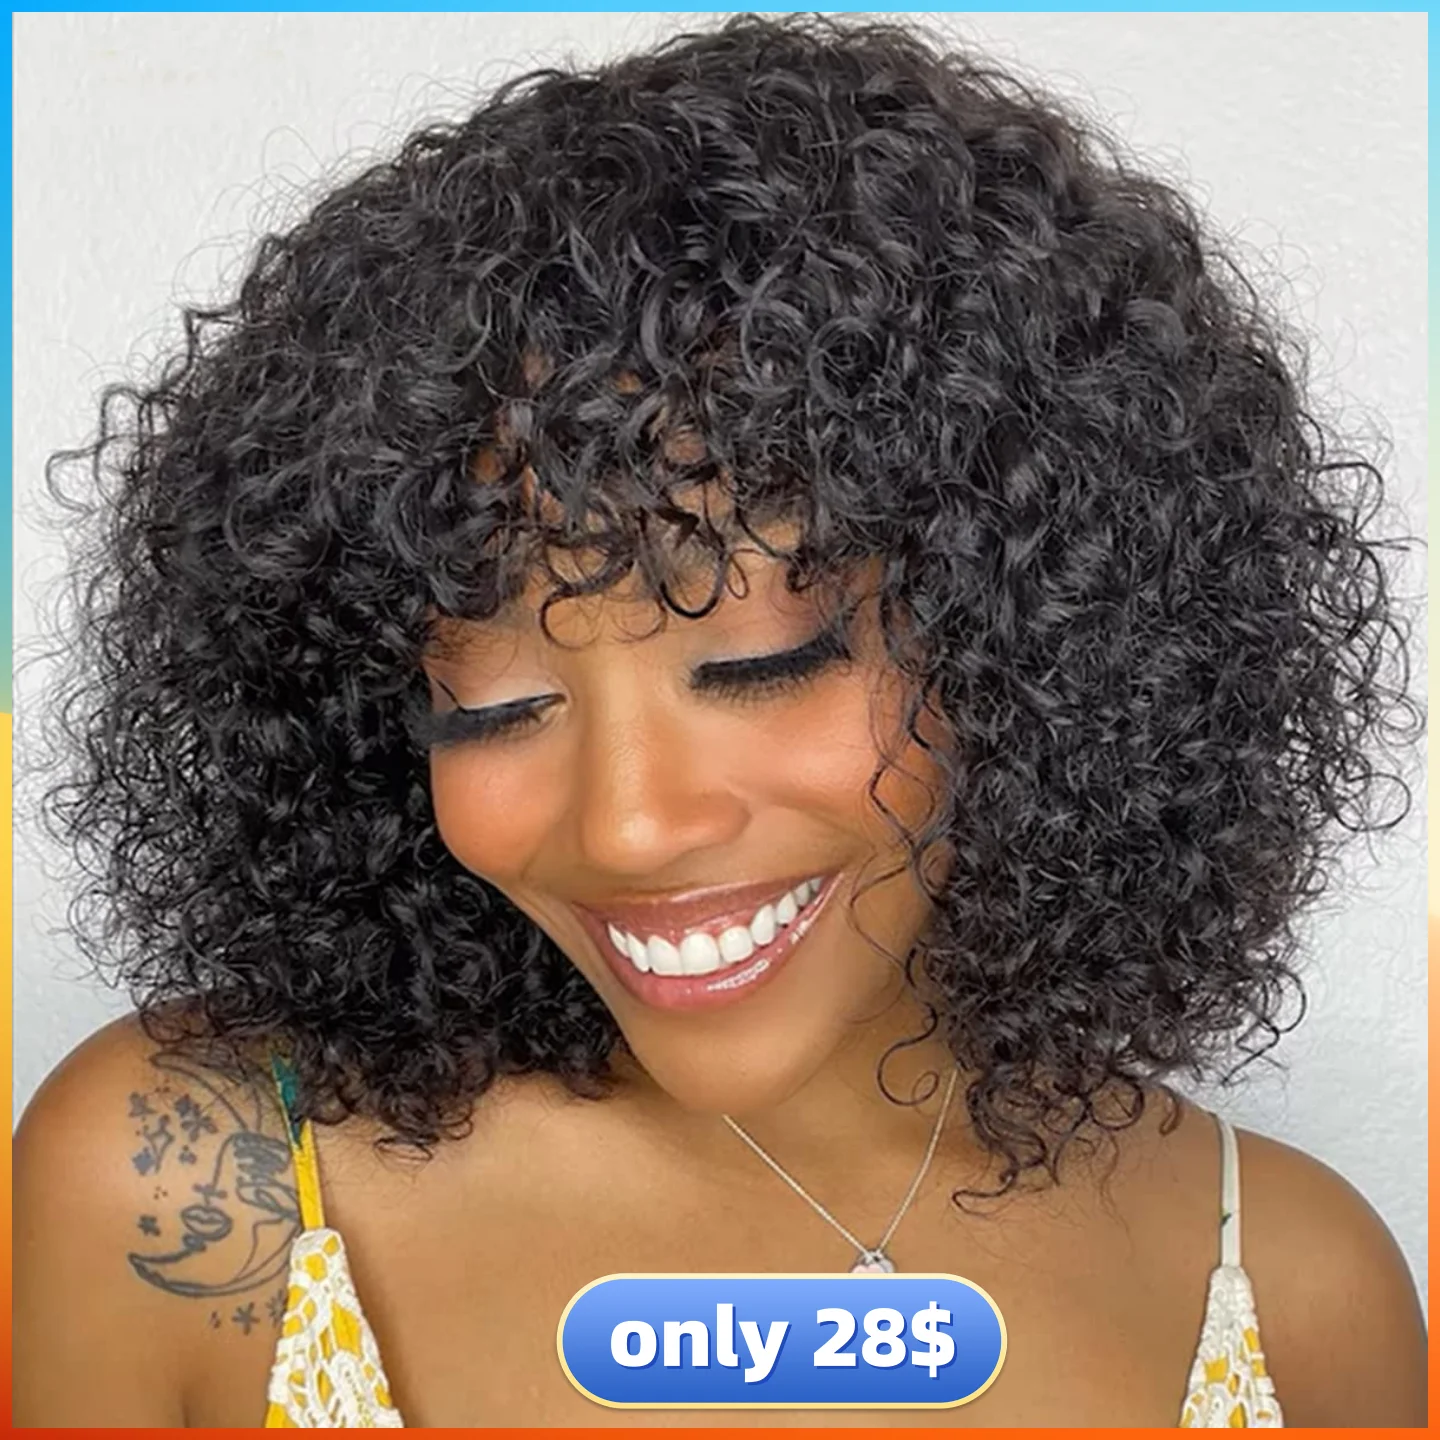 

16INCH Short Curly Bob Wig With Bangs Human Hair Natural Black Bouncy Shaggy Fringe Bang Wigs For Women Real Brazilian Remy Hair